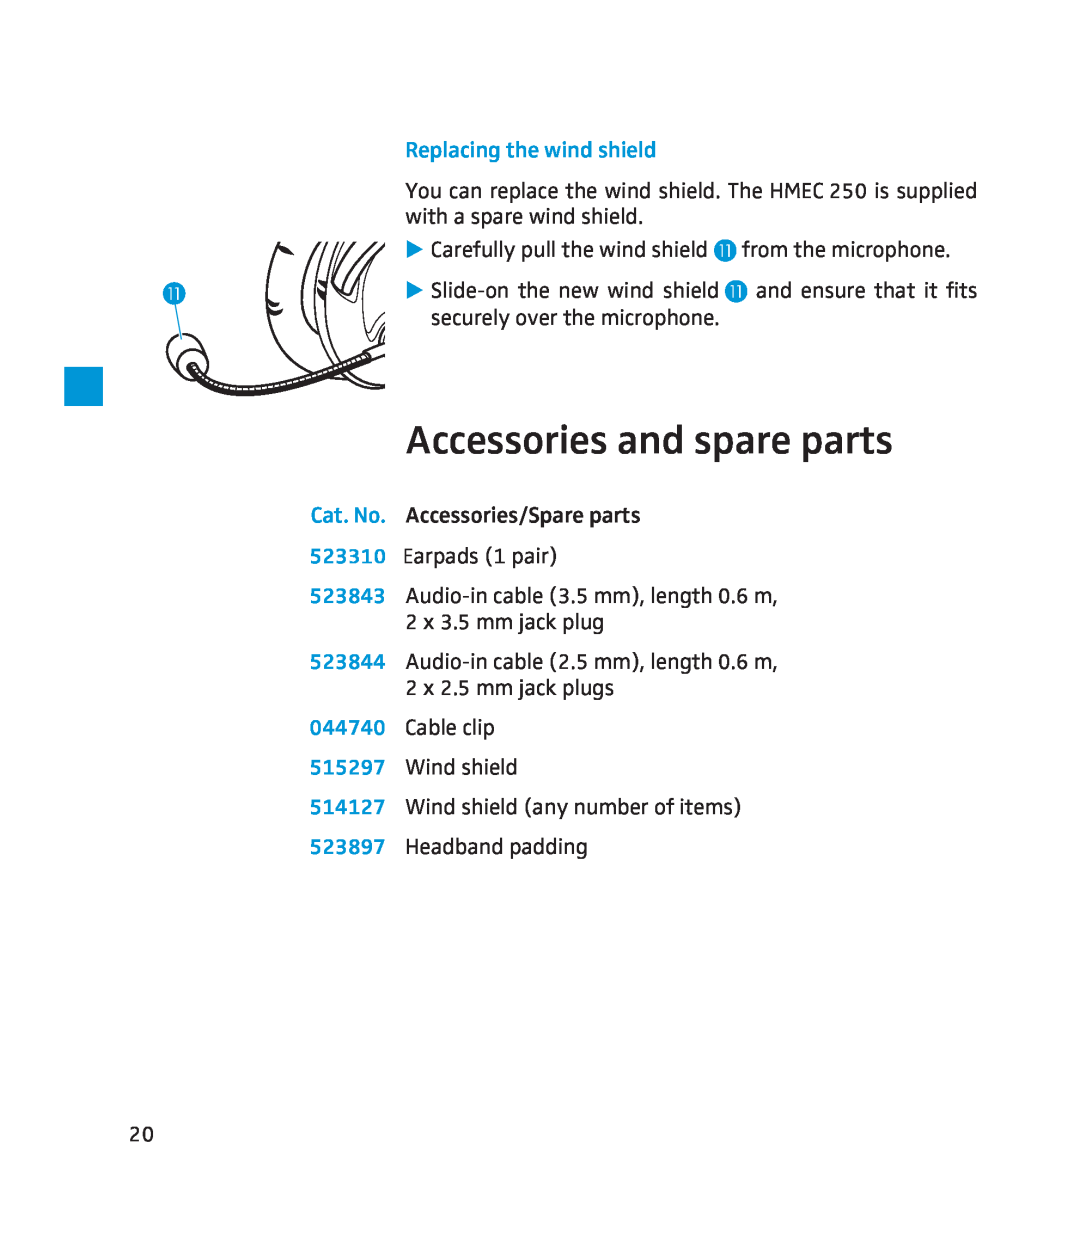 Sennheiser HMEC 250 instruction manual Accessories and spare parts, Replacing the wind shield 